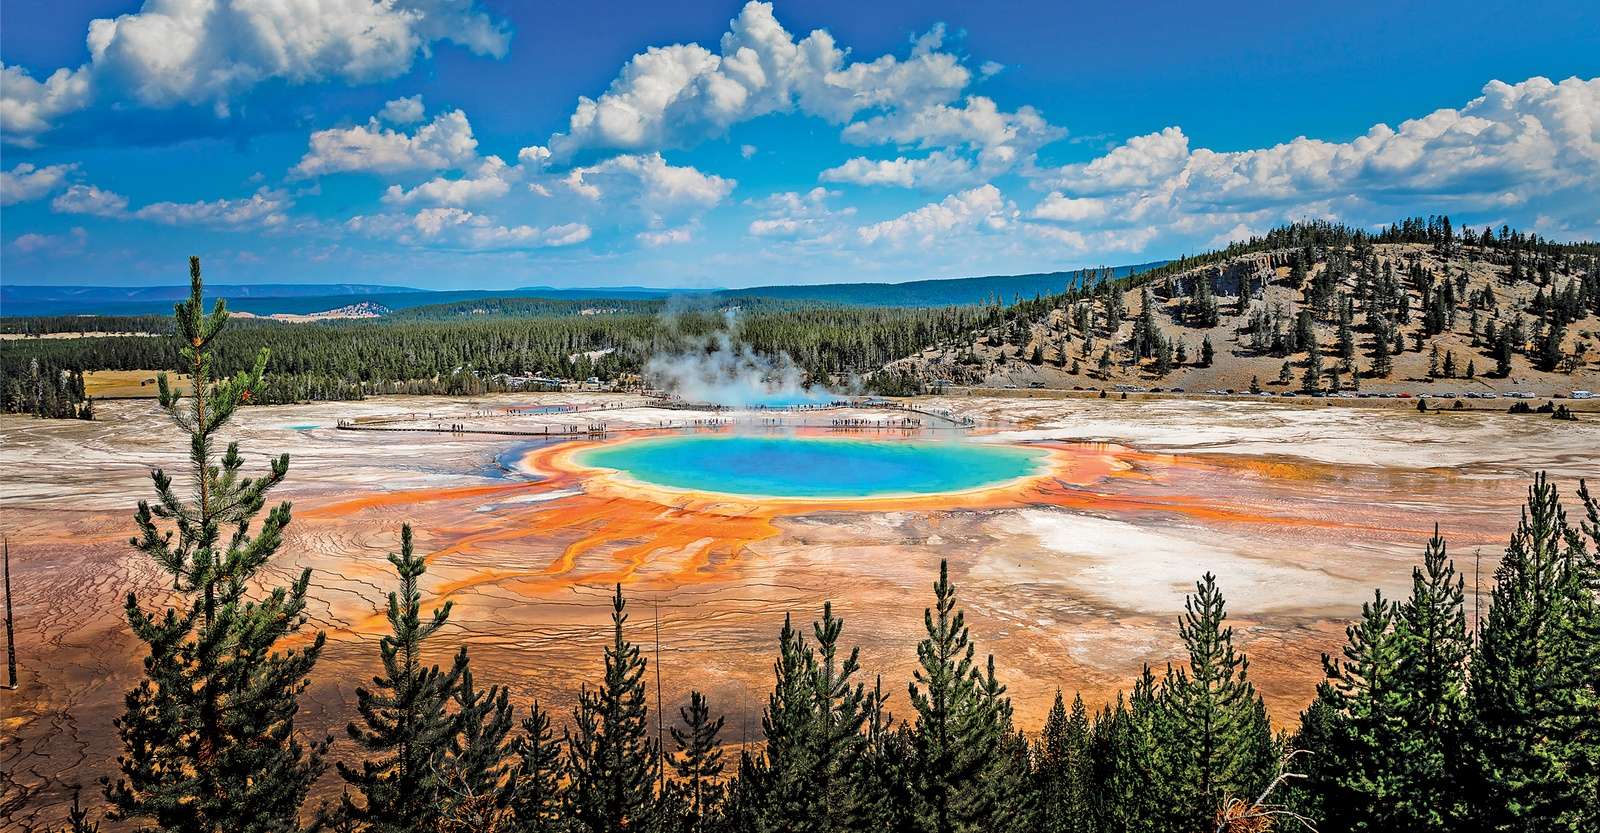 Grand Prismatic Spring, Yellowstone National Park, Wyoming.